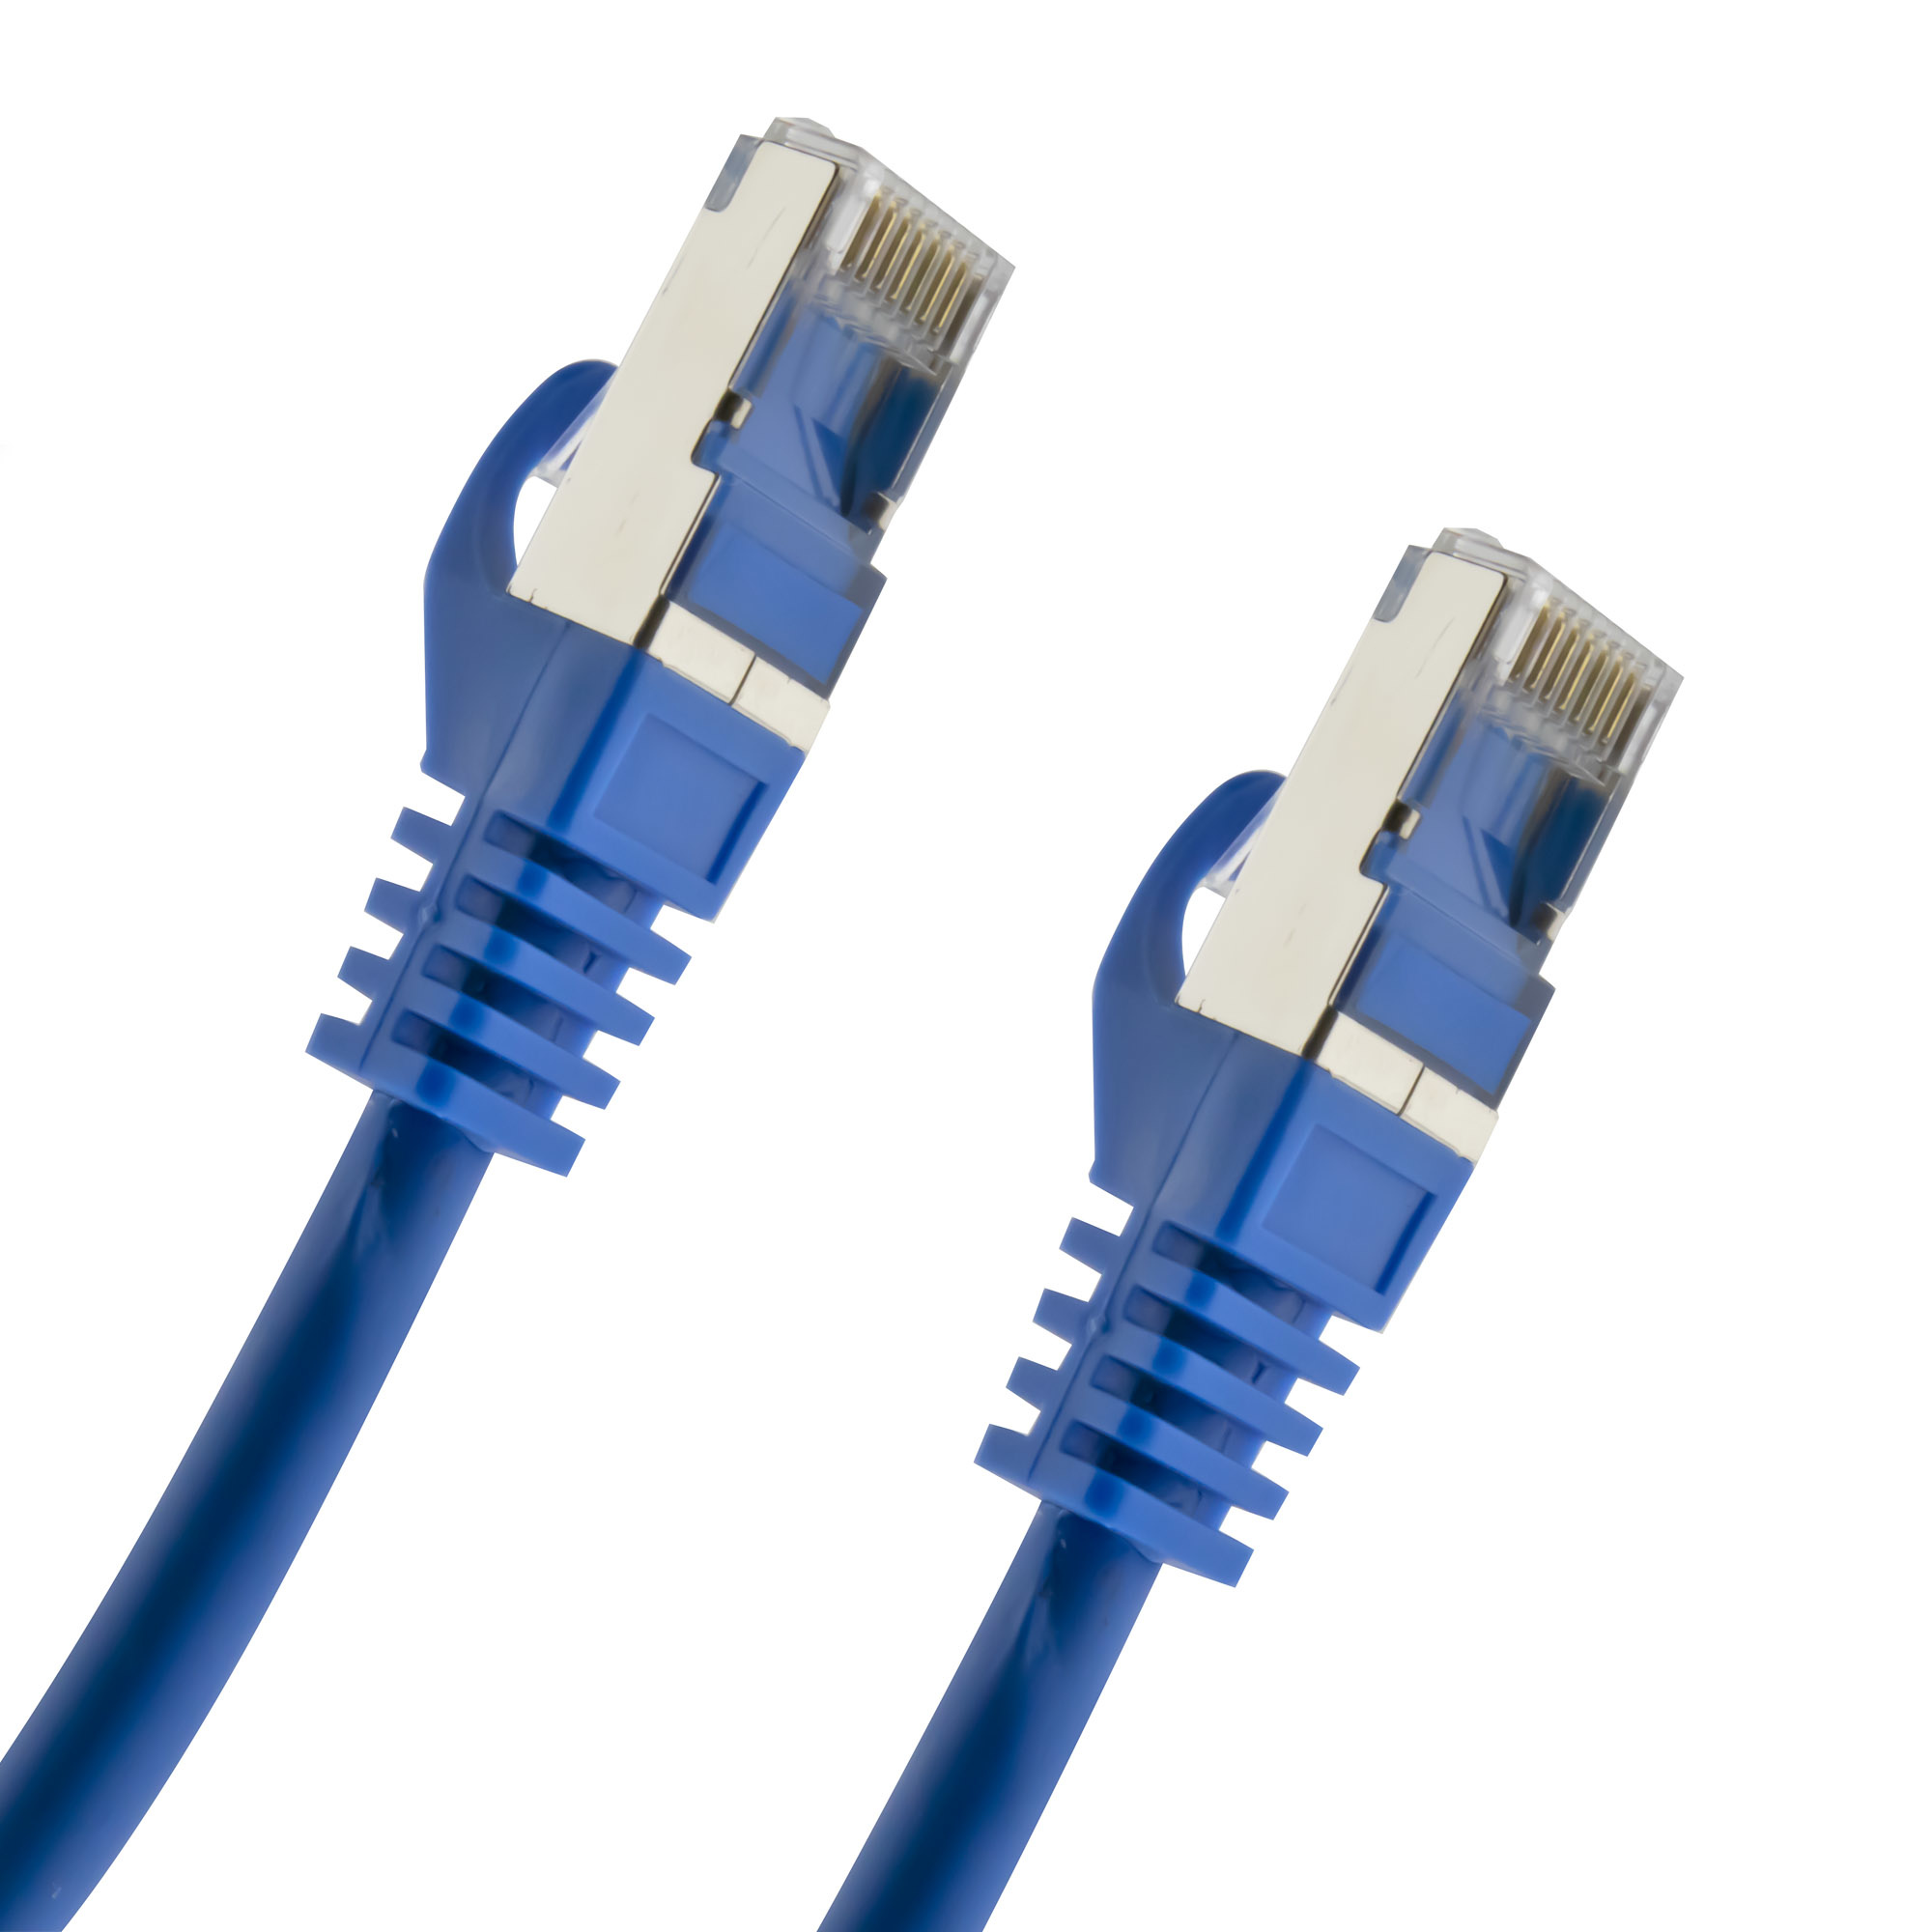 Network cable Cat. 7 S/FTP PIMF 5.00 meter blue